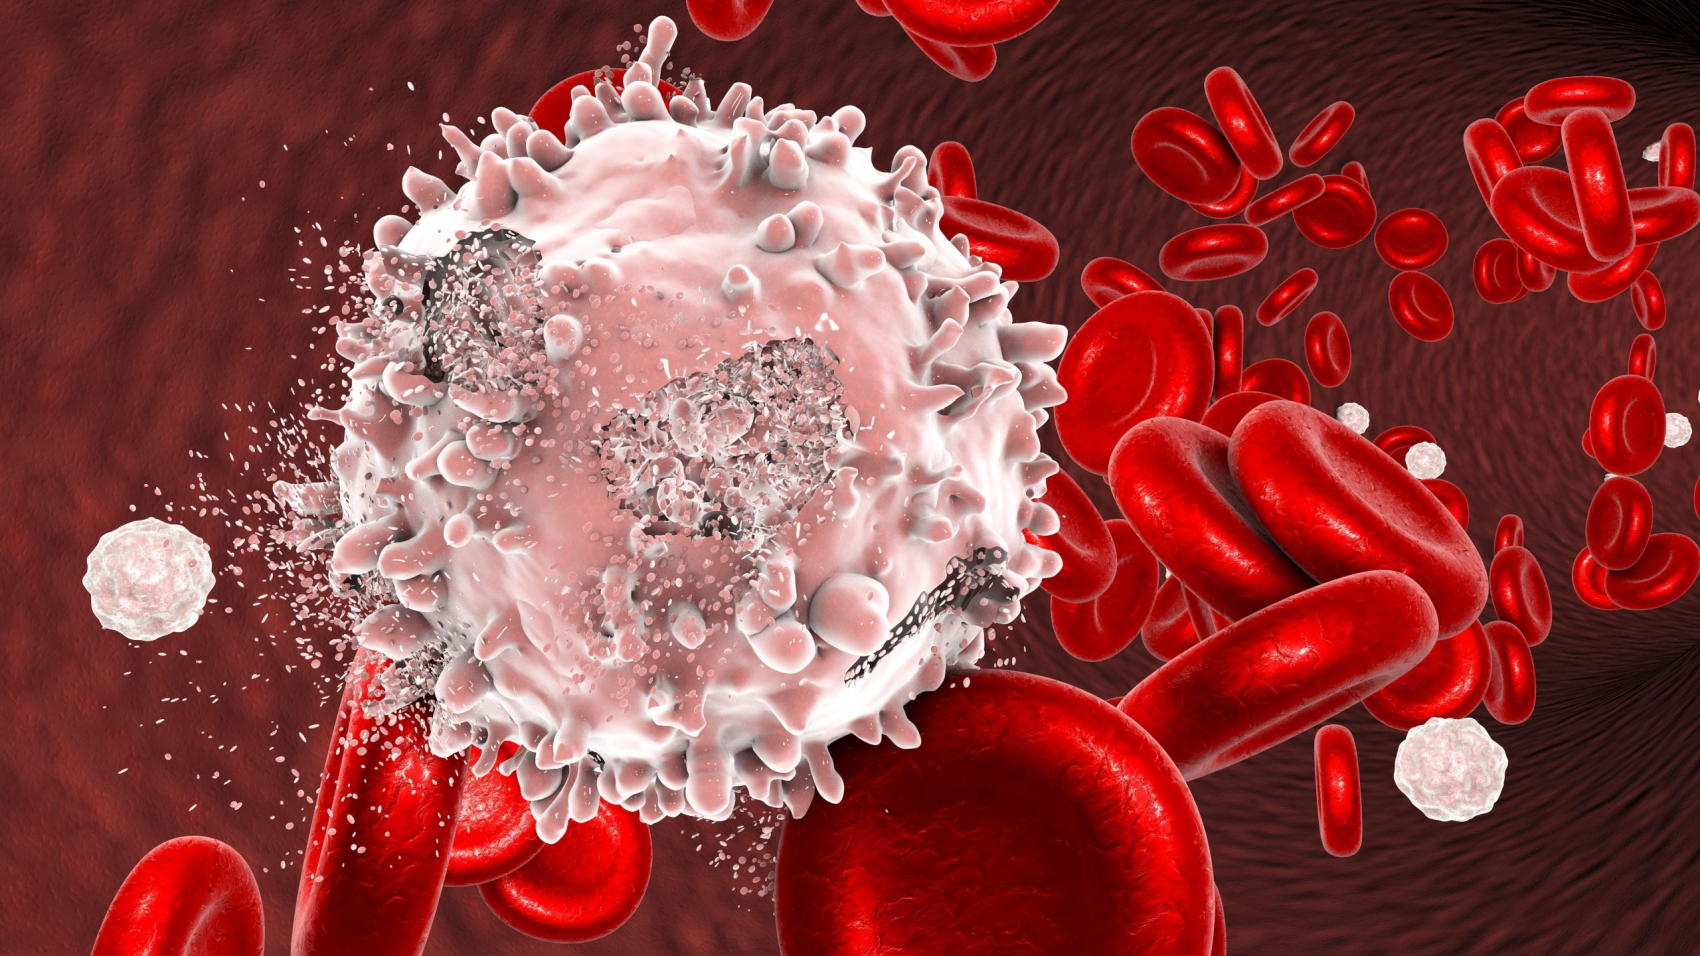 Destruction of leukaemia cell, conceptual image. 3D illustration which can be used to illustrate blood cancer treatment
Usage: Journal Inside
00740_020_004 (2017) Publikationsname / Publikationsnummer / E-Tag TT.MM.JJJJ (optional)
 *** Local Caption *** © Kateryna_Kon / stock.adobe.com